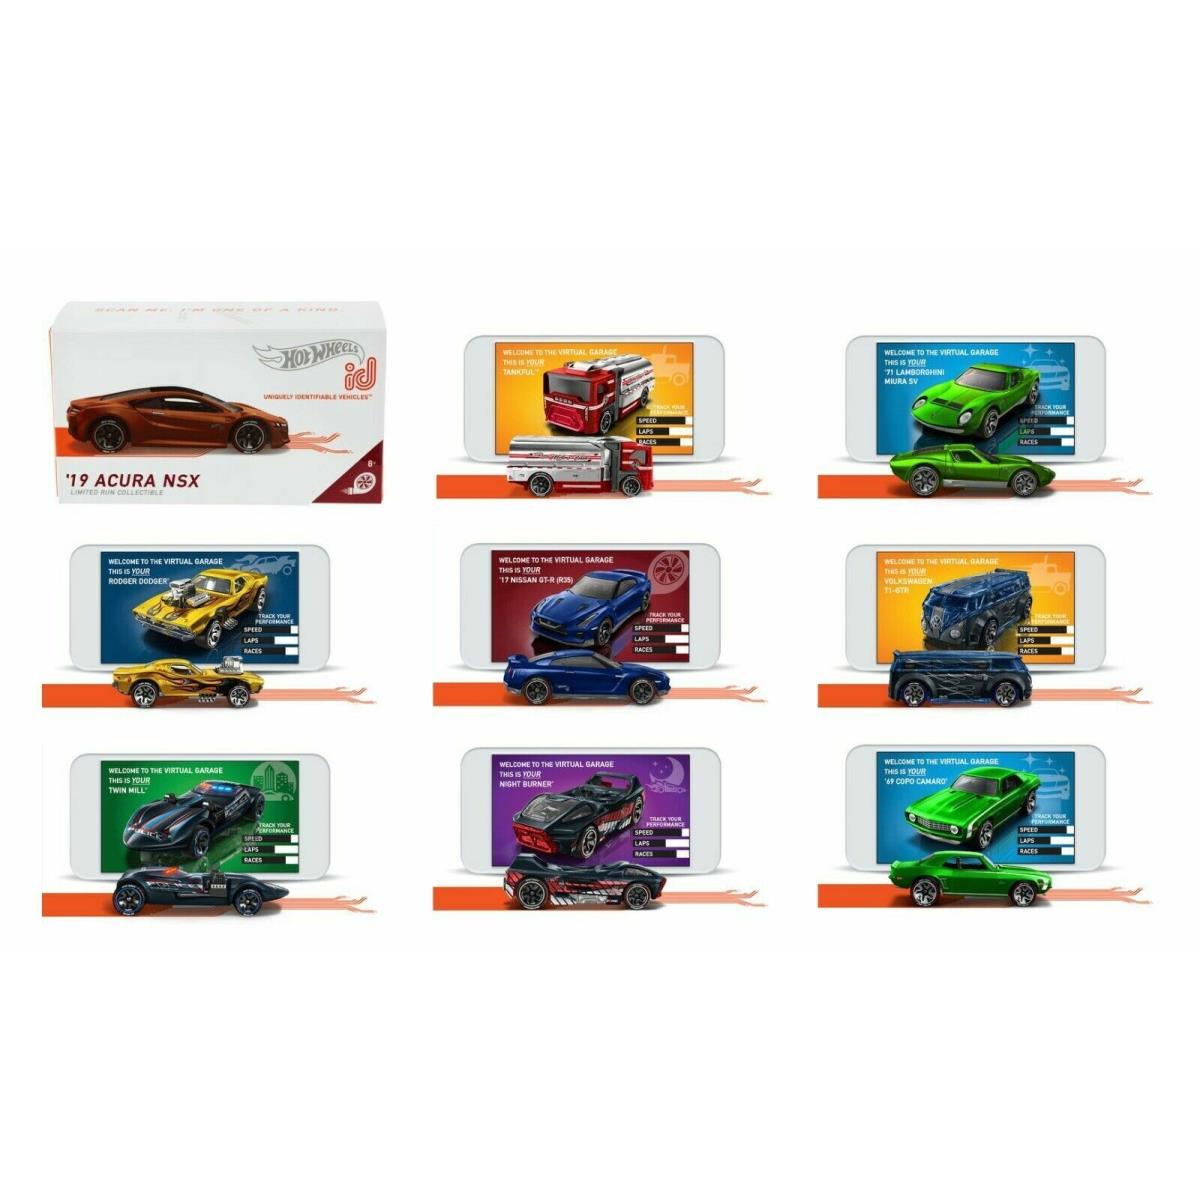 2020 Hot Wheels Id Cars Series 2 Case of 16 1/64 Scale FXB02-999P